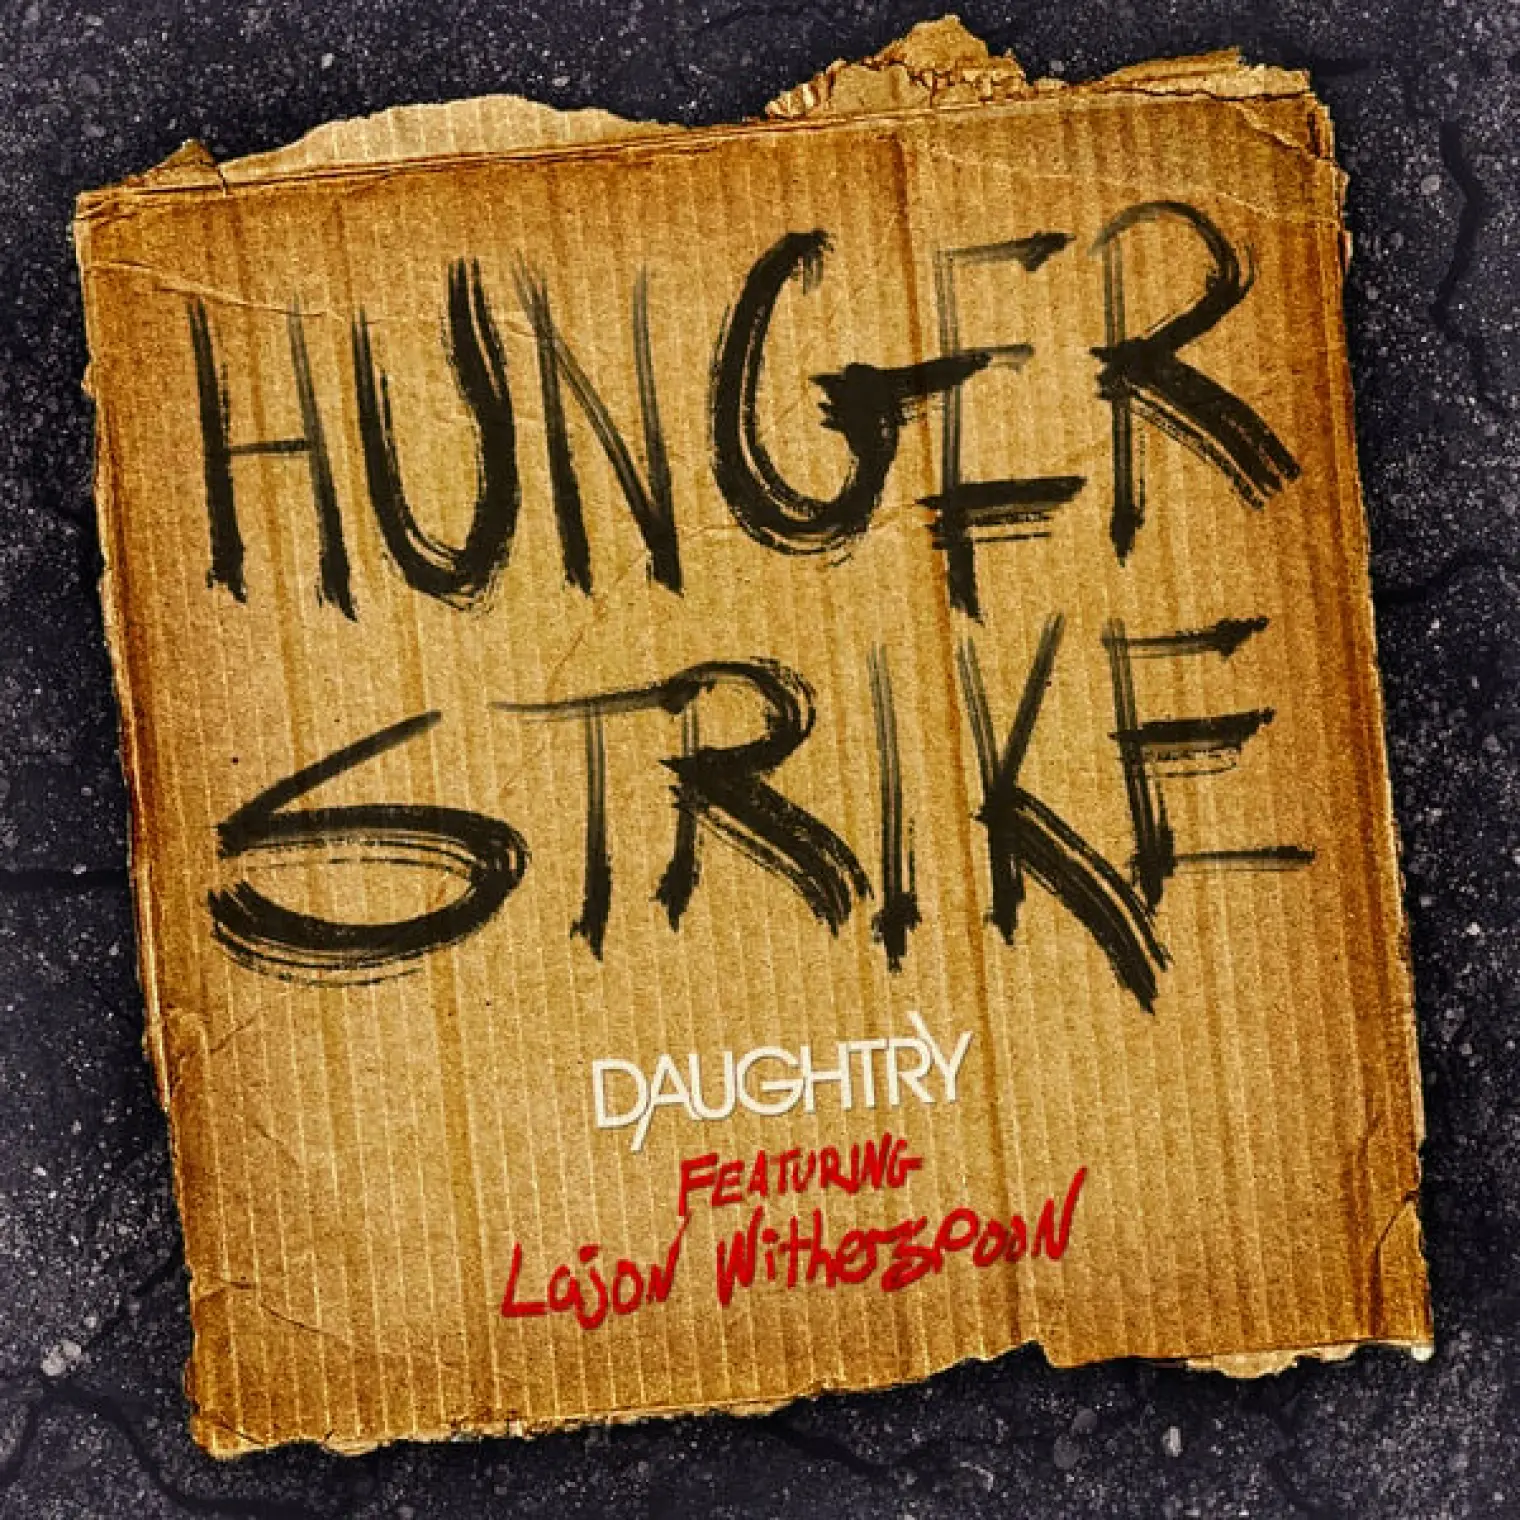 Hunger Strike (feat. Lajon Witherspoon) -  Daughtry 